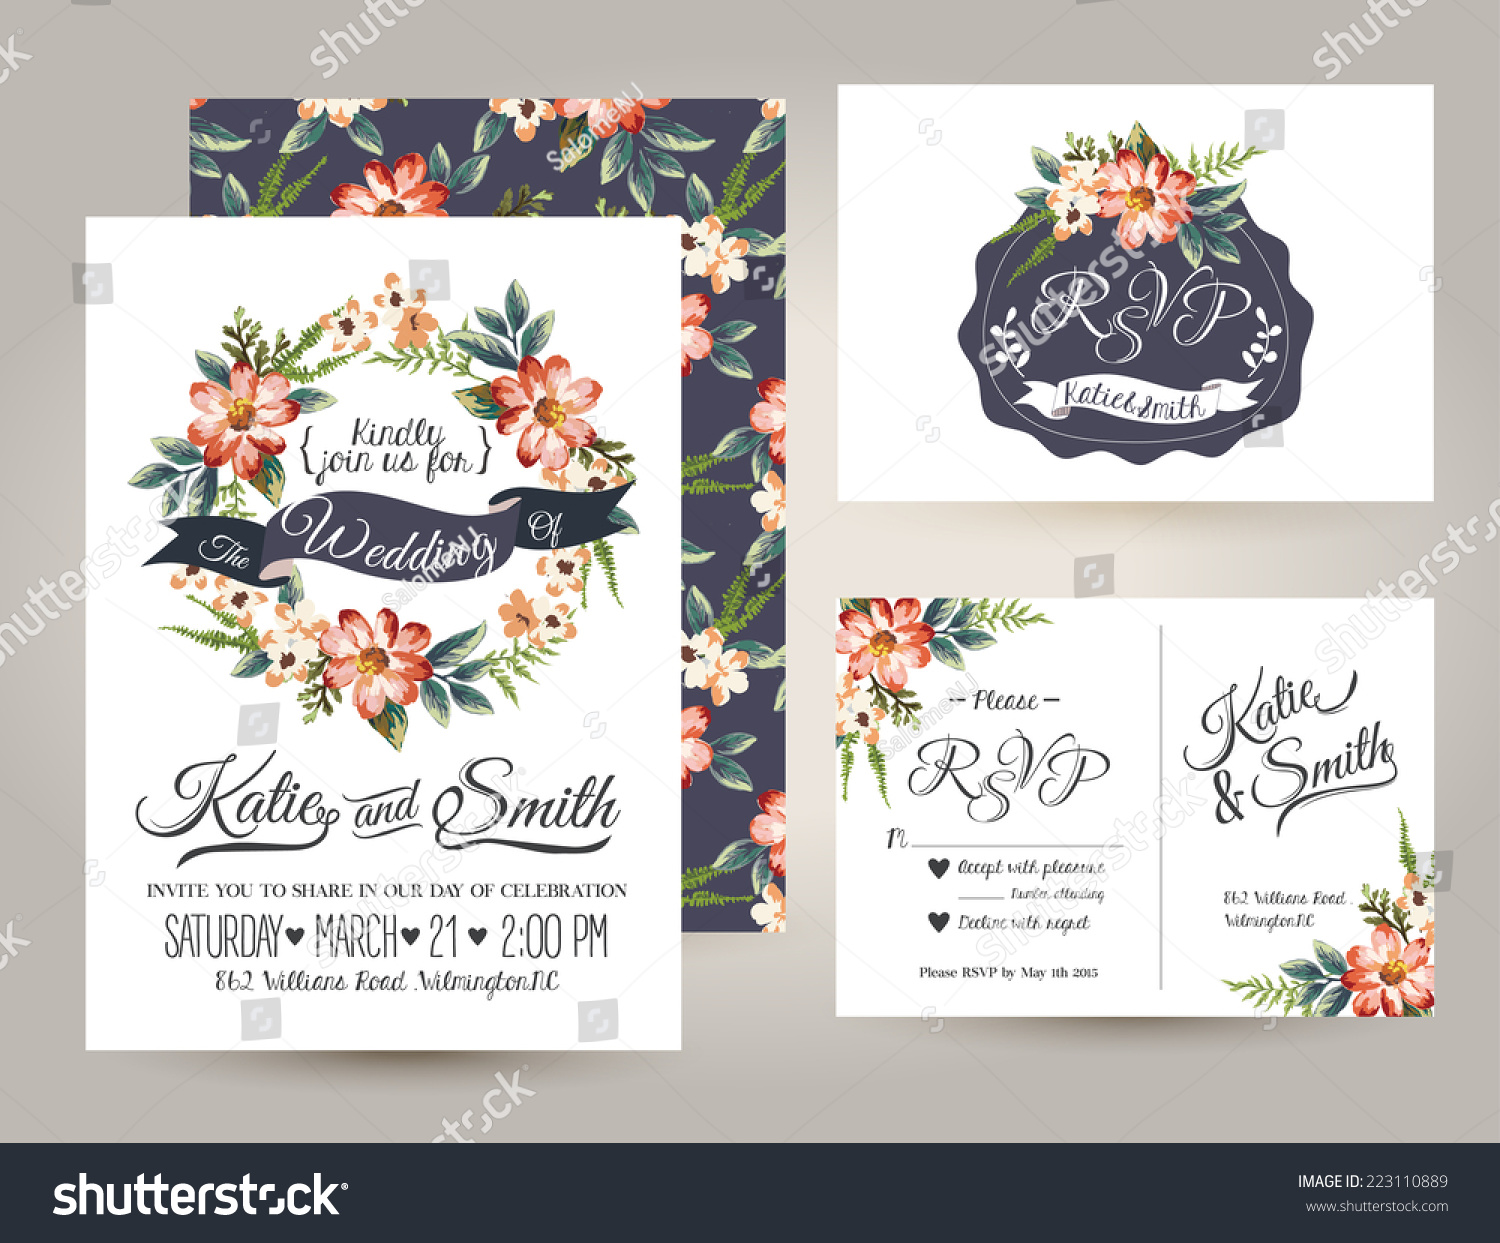 wedding invitation card suite with daisy flower Templates #223110889